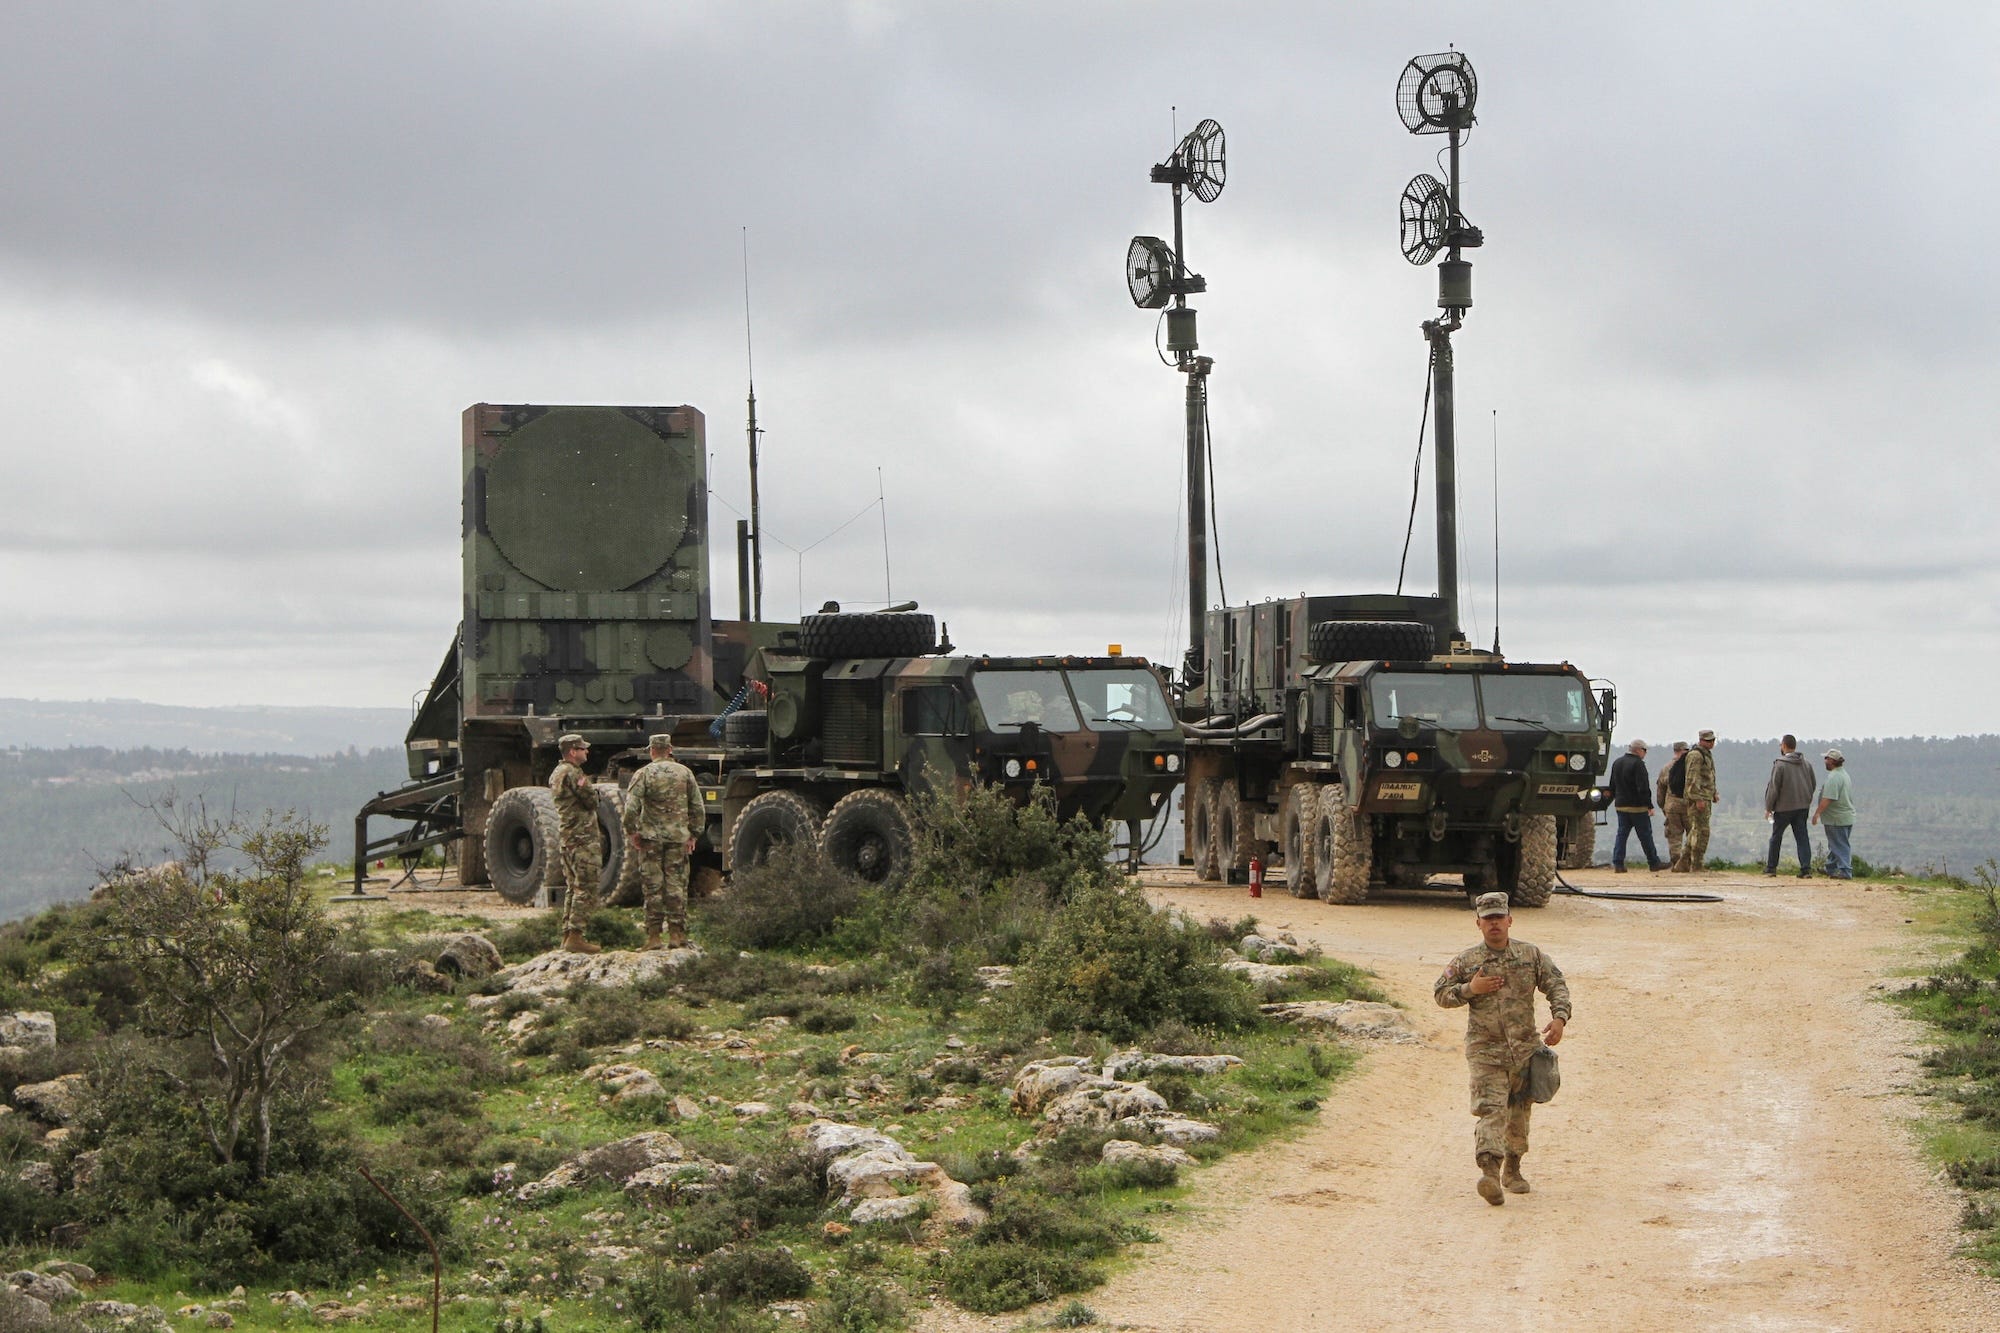 microsoft, israel is retiring its patriot missile batteries. they could help a struggling ukraine.